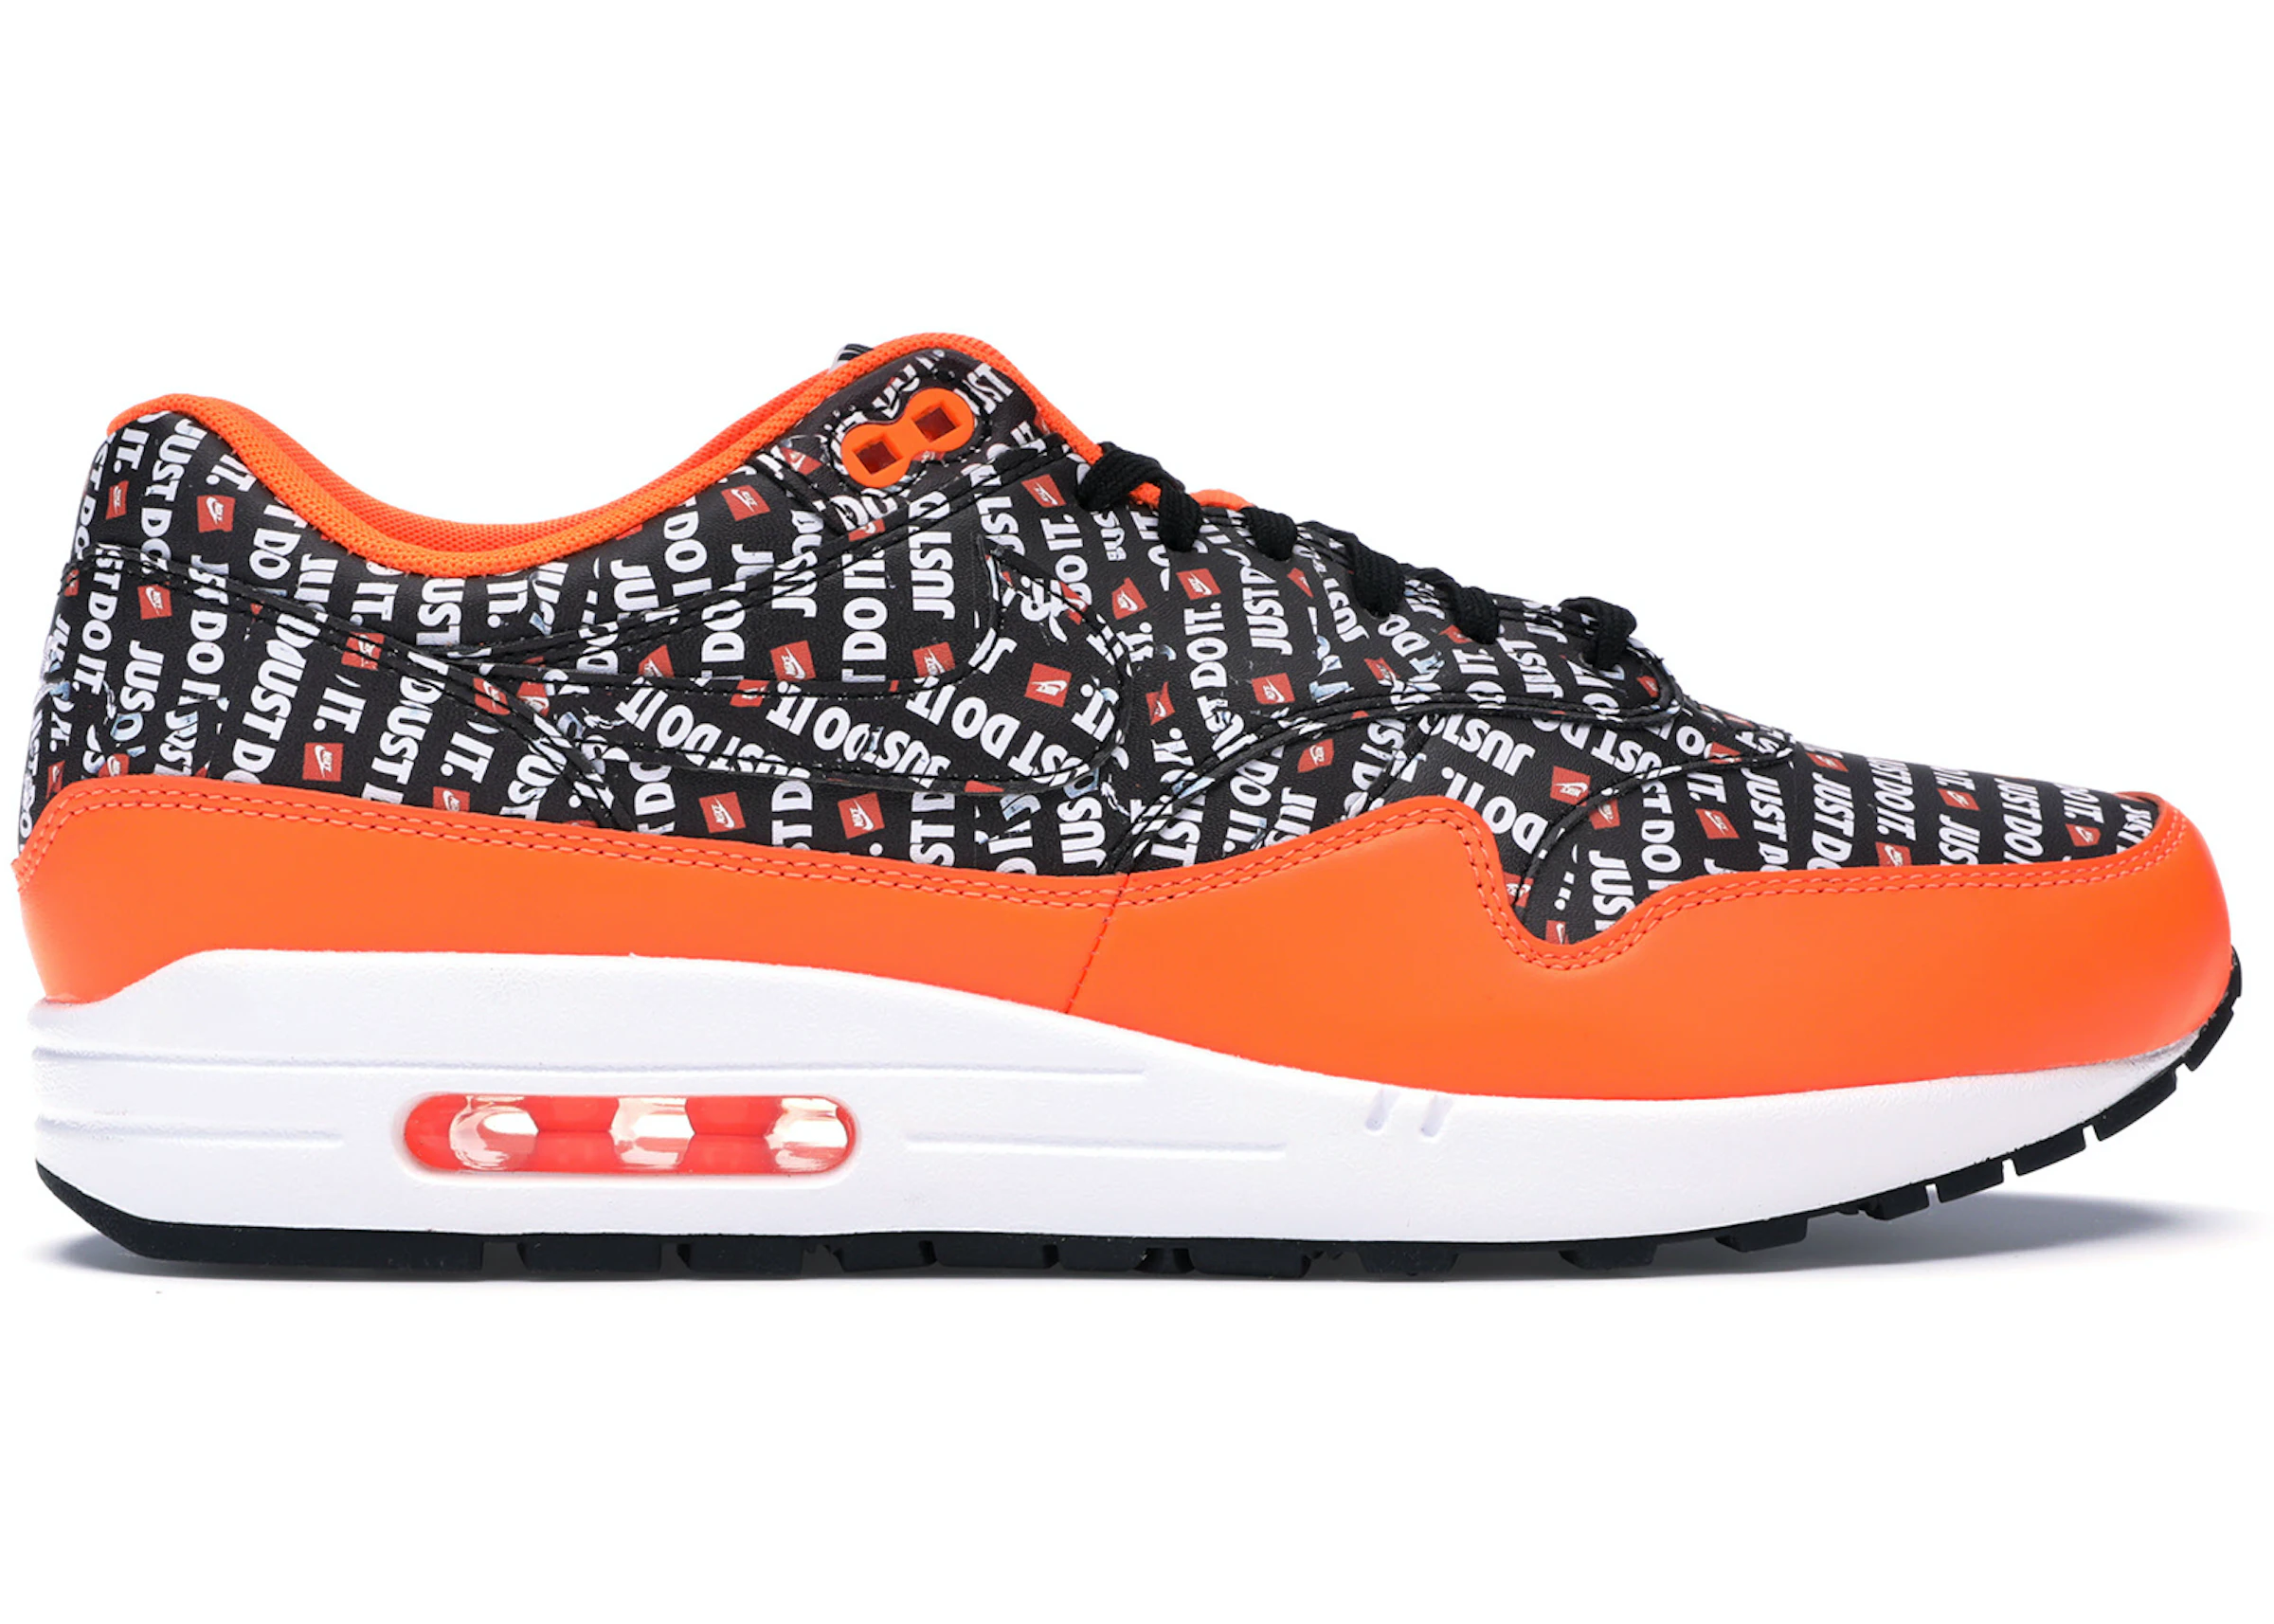 Archaeologist further Absorbent Nike Air Max 1 Just Do It Pack Black Orange - 875844-008 - US